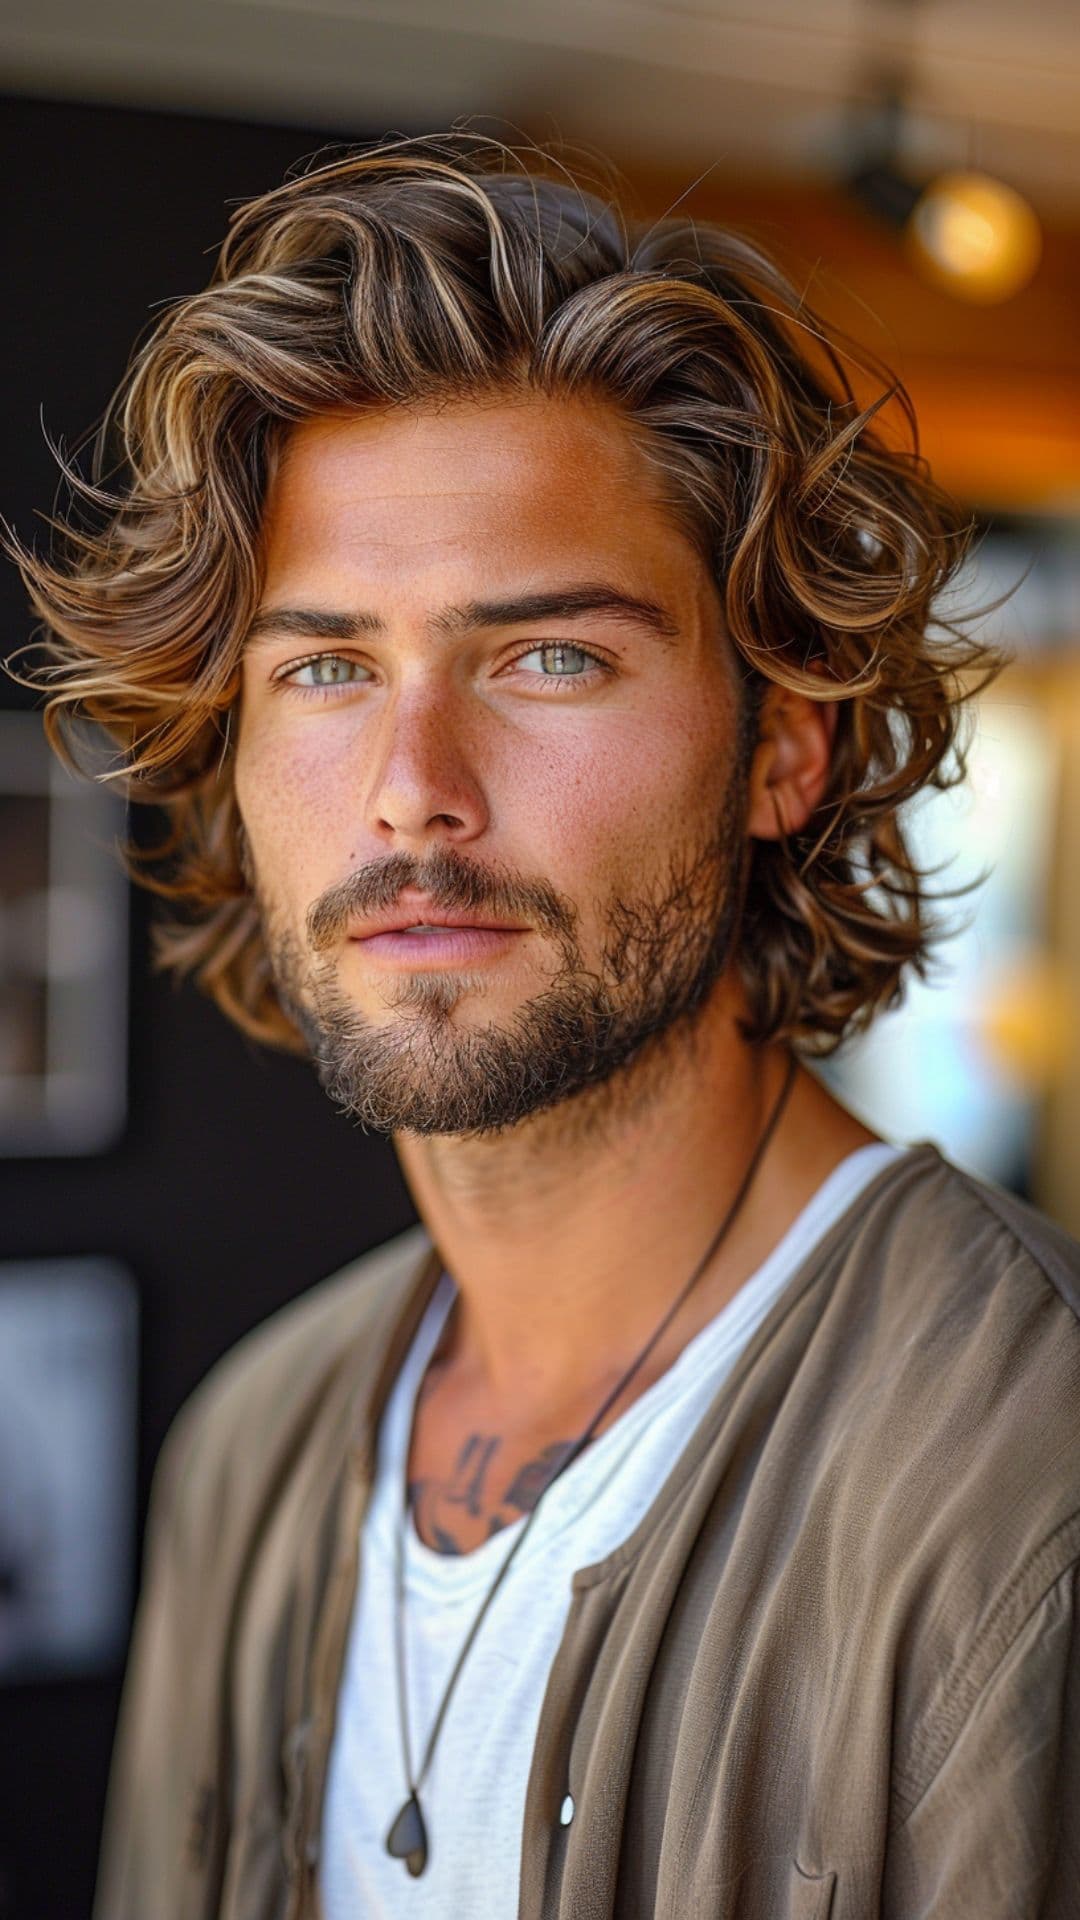 A man modelling a thick and wavy hair.